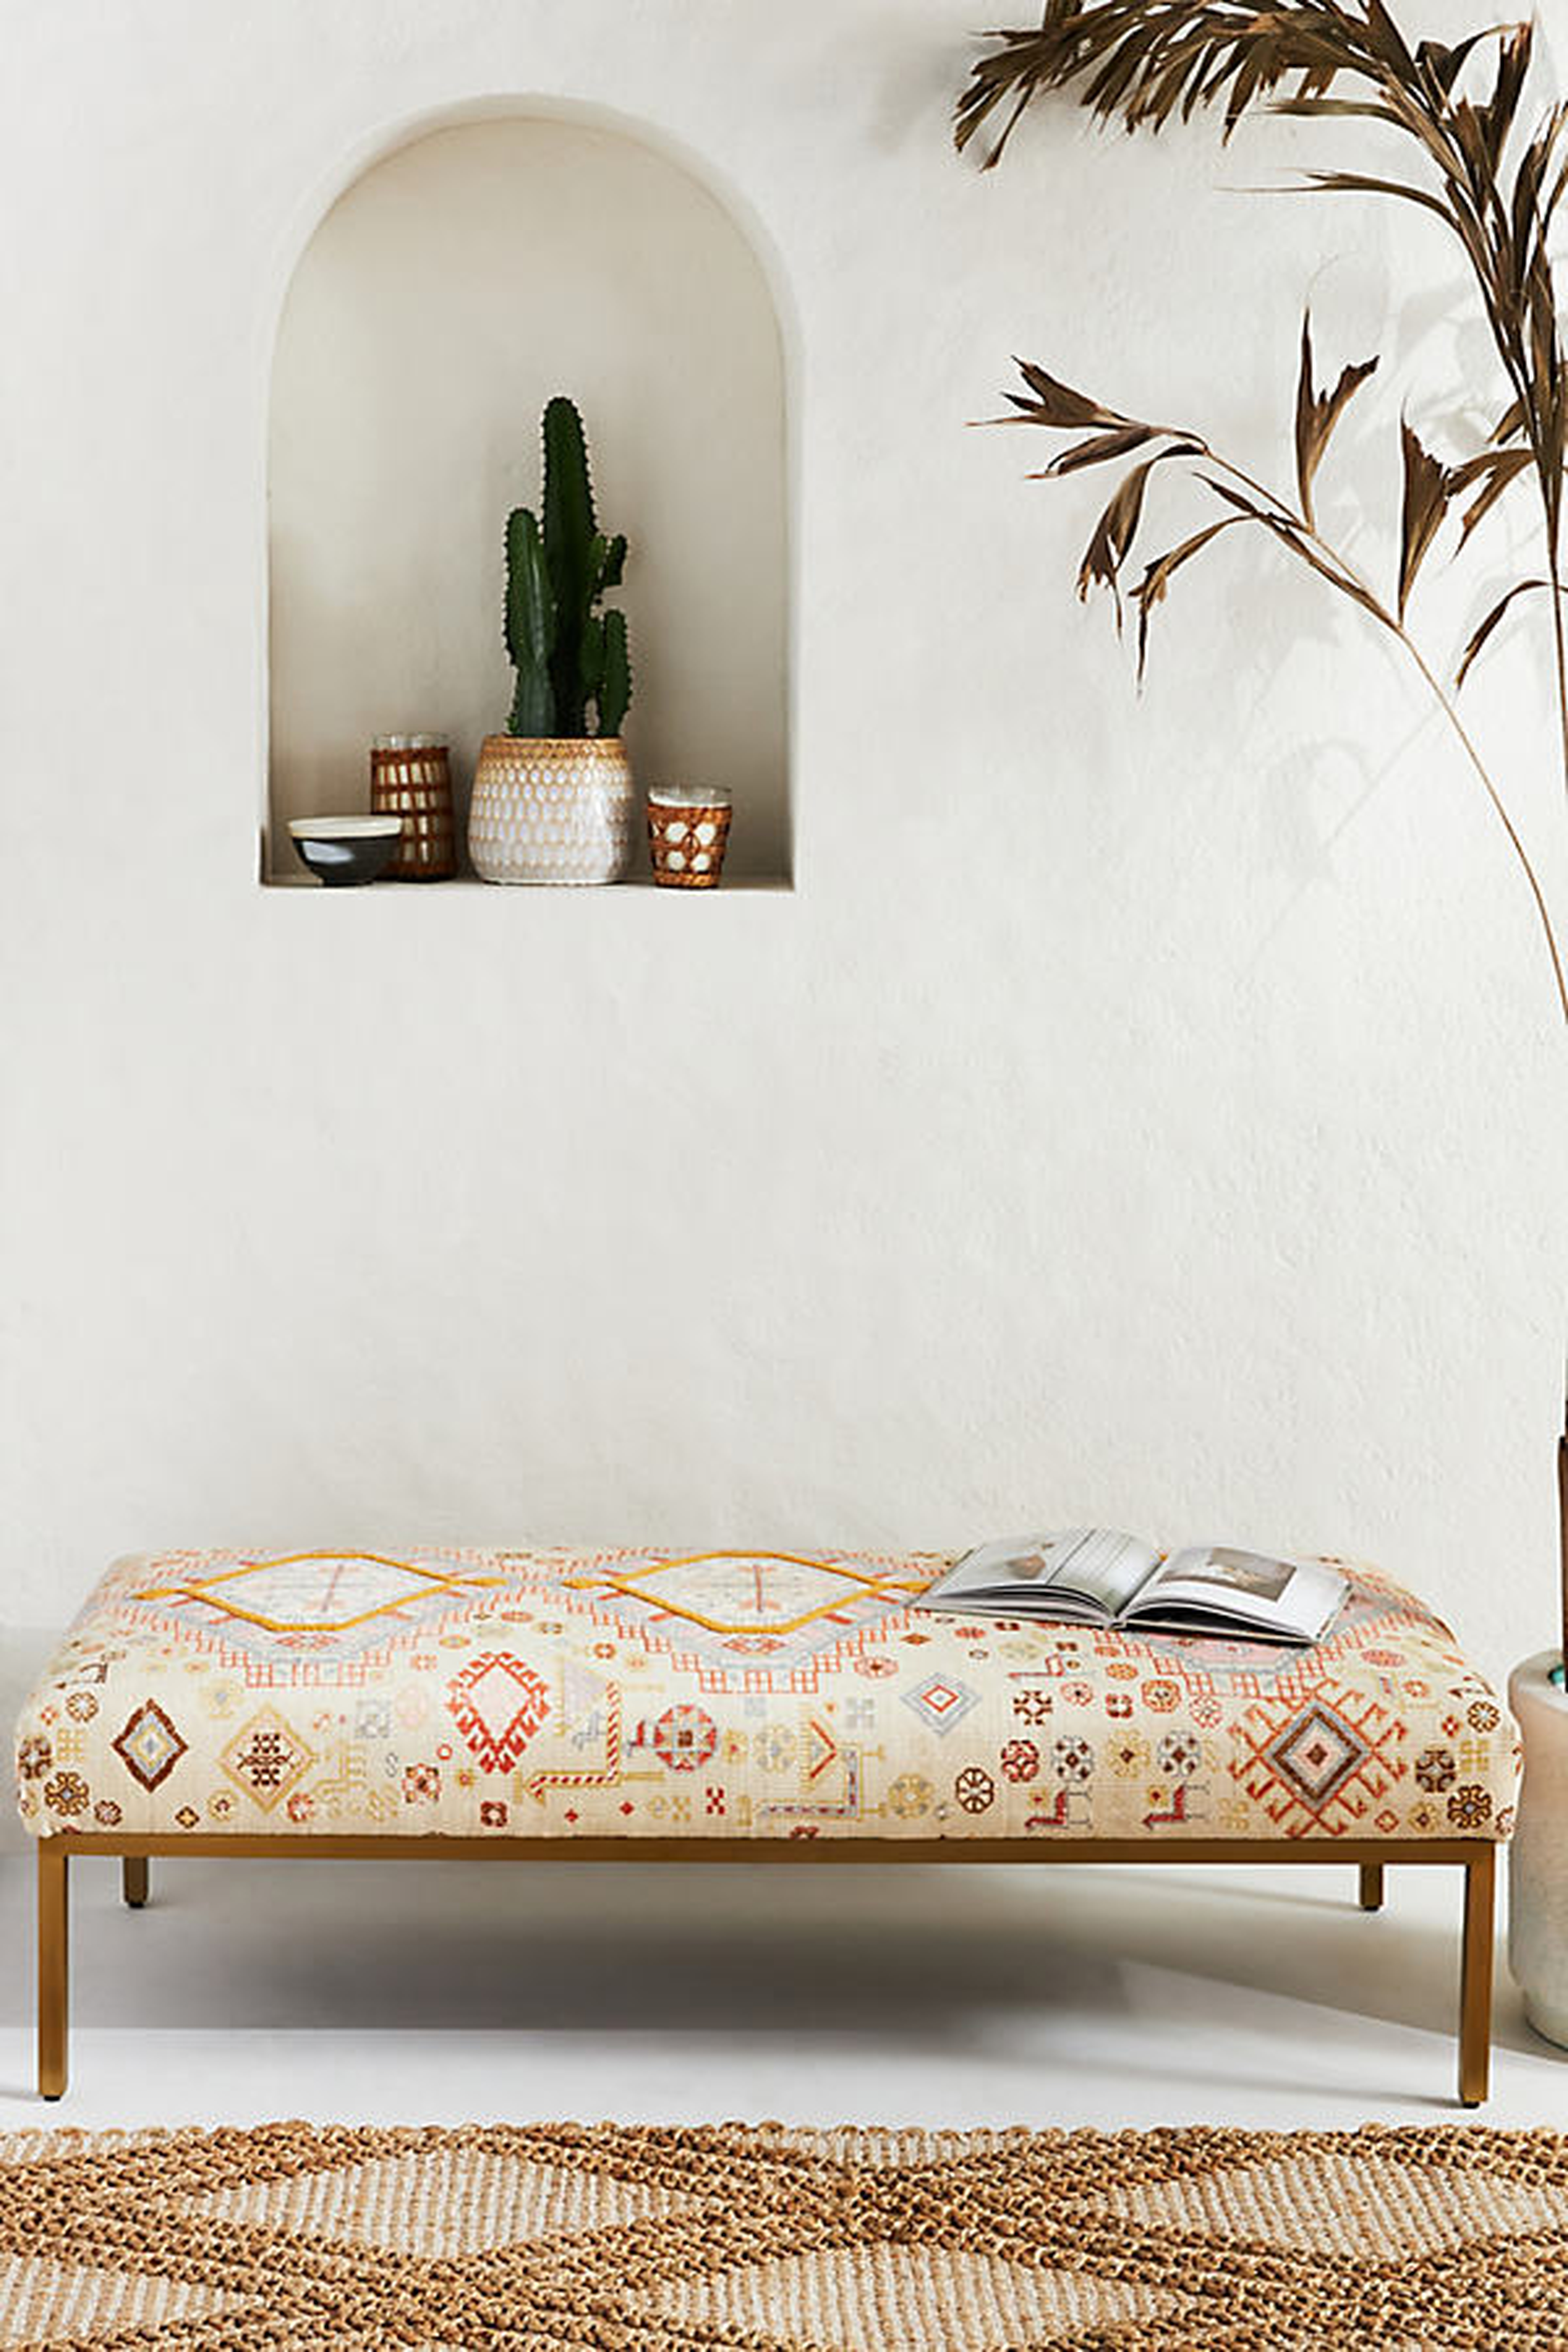 Rug-Printed Folkthread Ottoman By Anthropologie in Assorted - Anthropologie